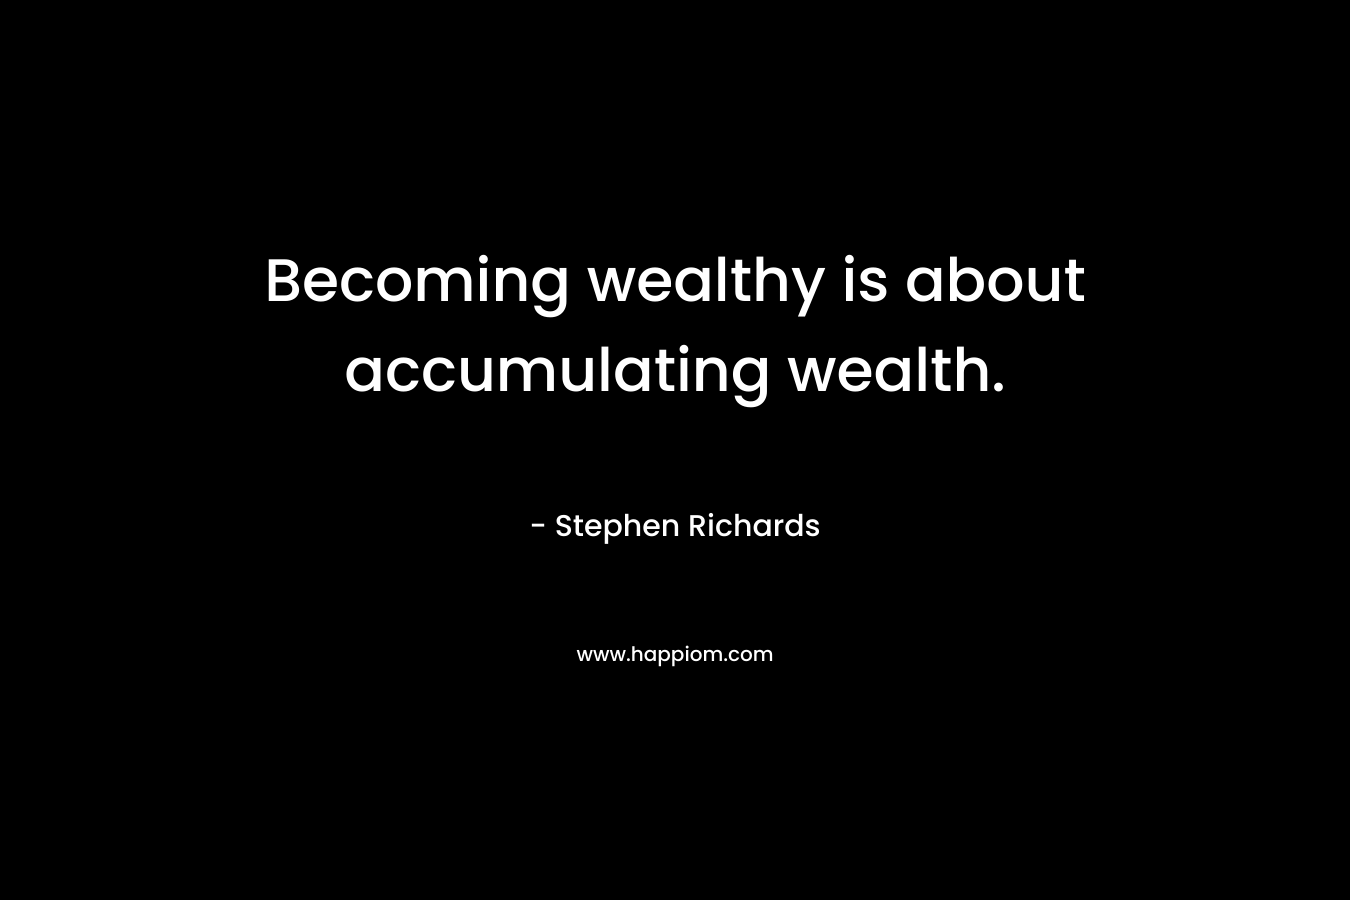 Becoming wealthy is about accumulating wealth.